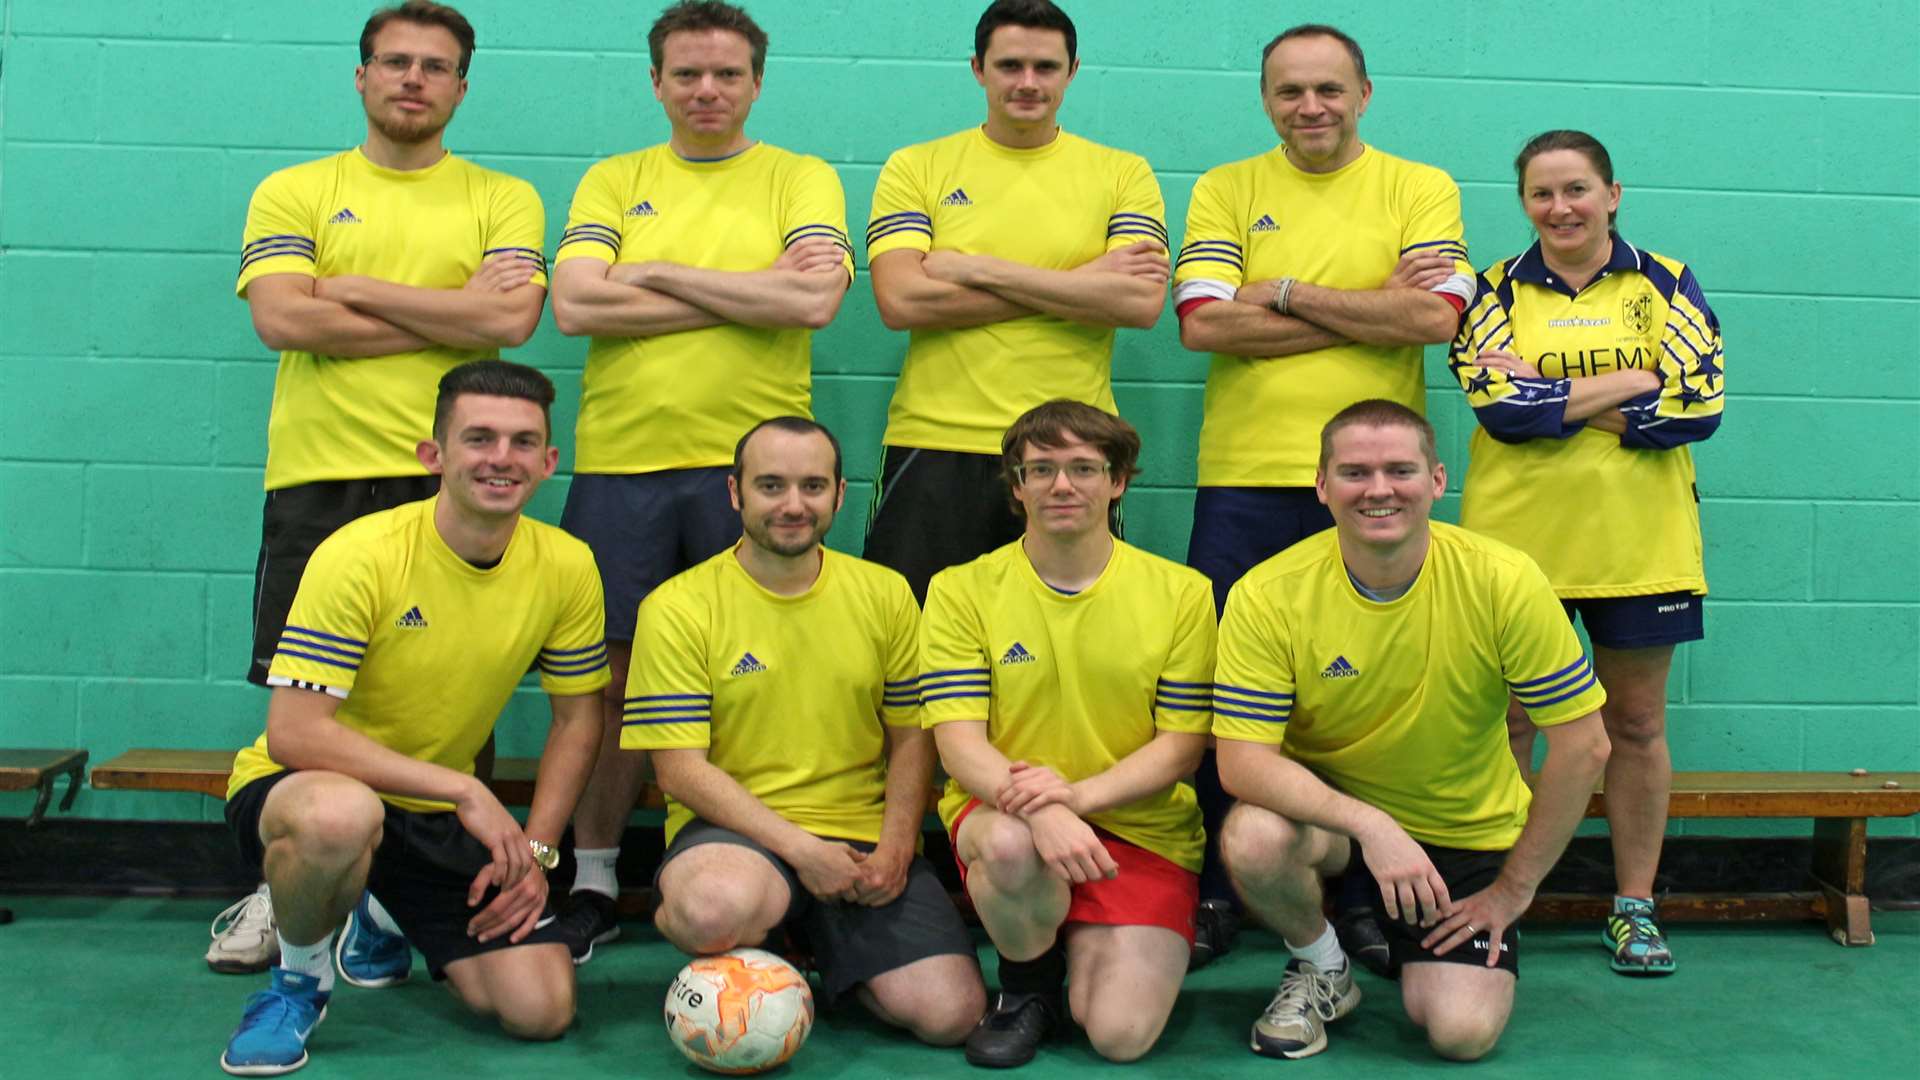 Teachers from Maplesden Noakes School are hosting a charity football match